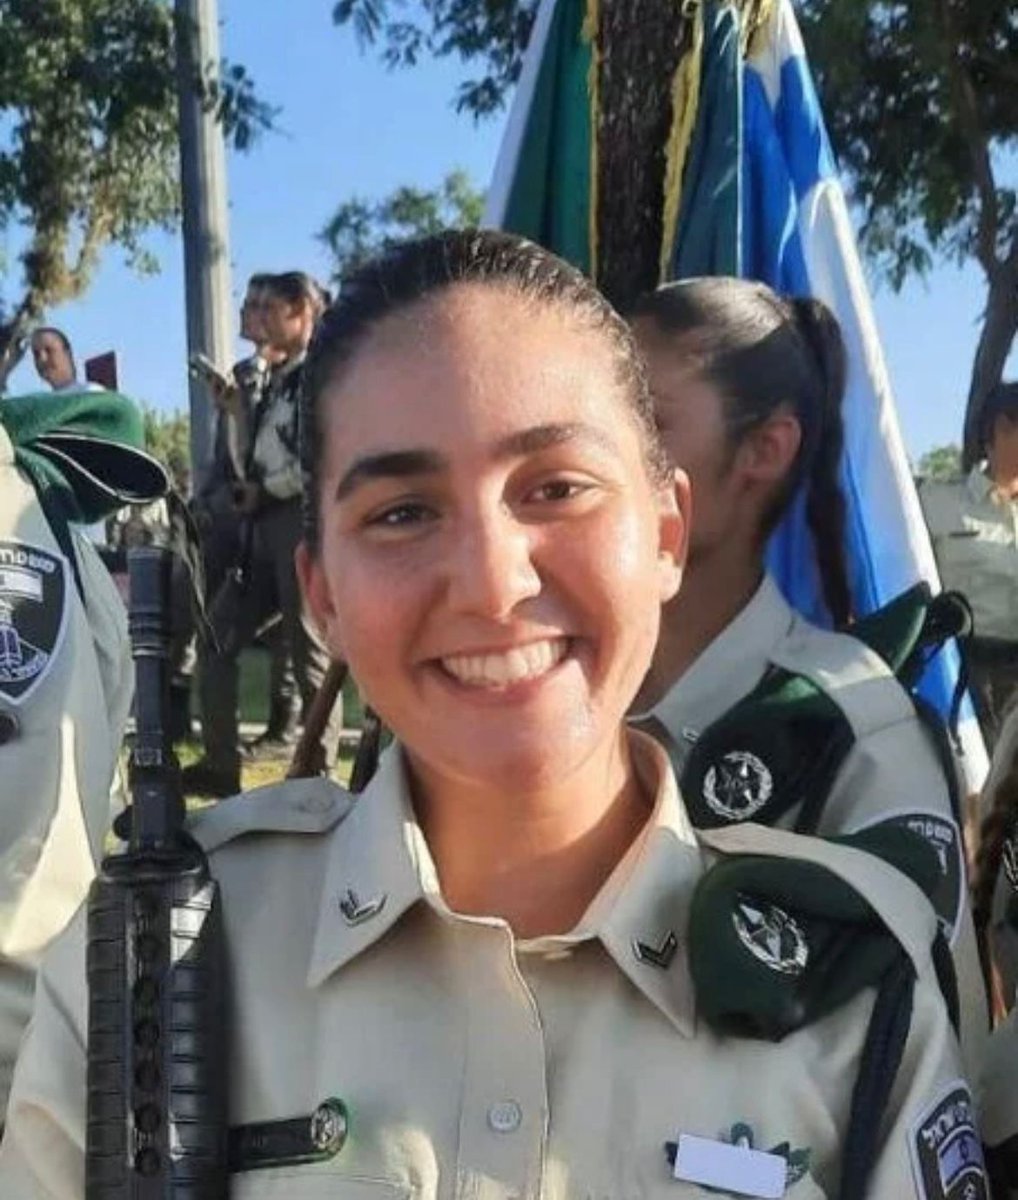 Rose Lubin, a 20-year-old from Atlanta, came to Israel alone two years ago. She enlisted in the IDF, served as a combat soldier, and on October 7, she went out armed to the entrance gate of Kibbutz Sa'ad. She was killed a month later in a terrorist attack in east Jerusalem.